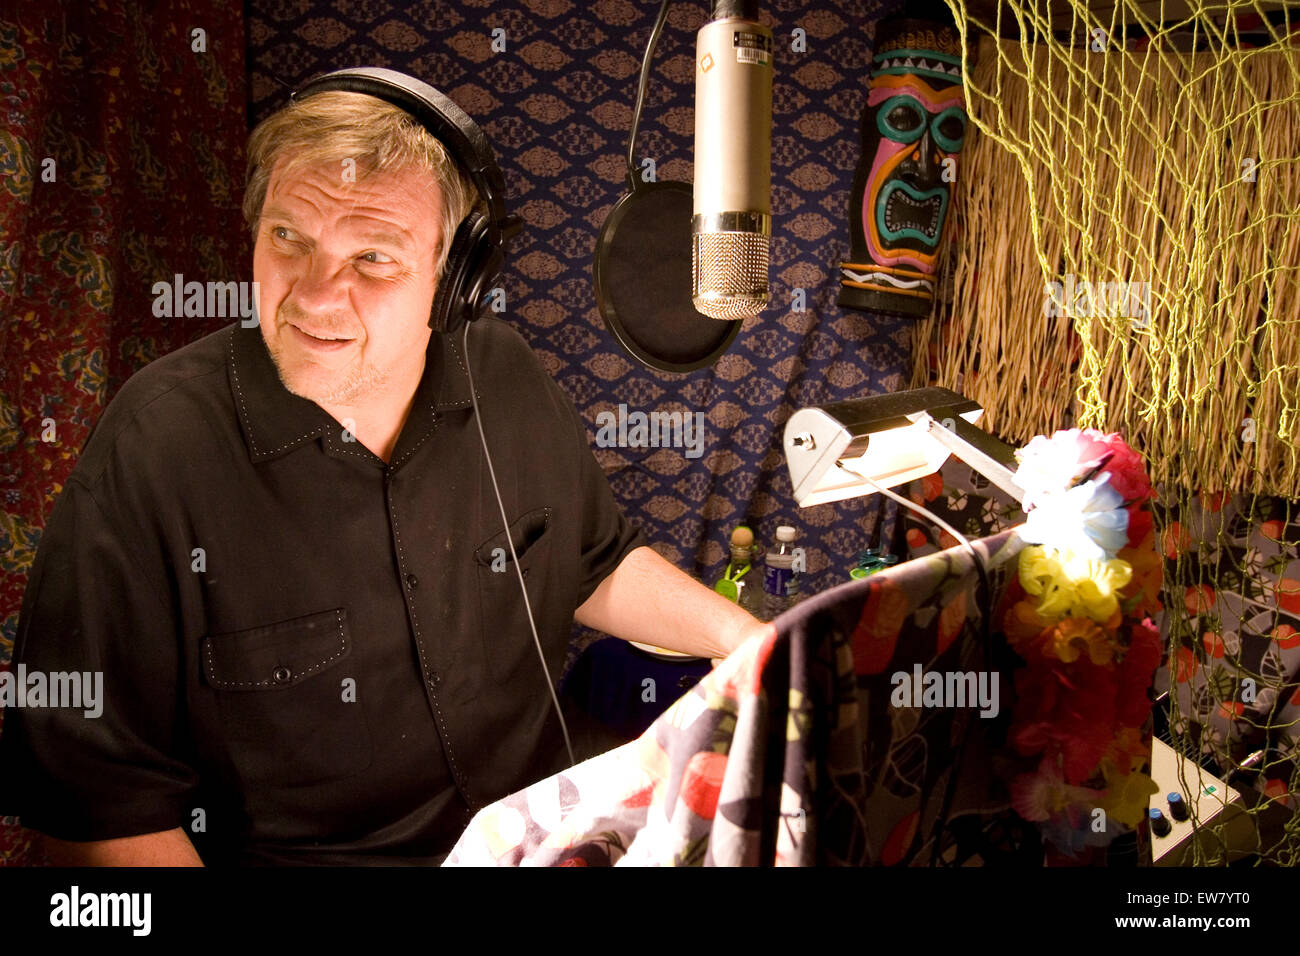 Rock musician Meatloaf recording his latest album 'Bat out of Hell III: The Monster is Loose' at The Village Recording Studios i Stock Photo